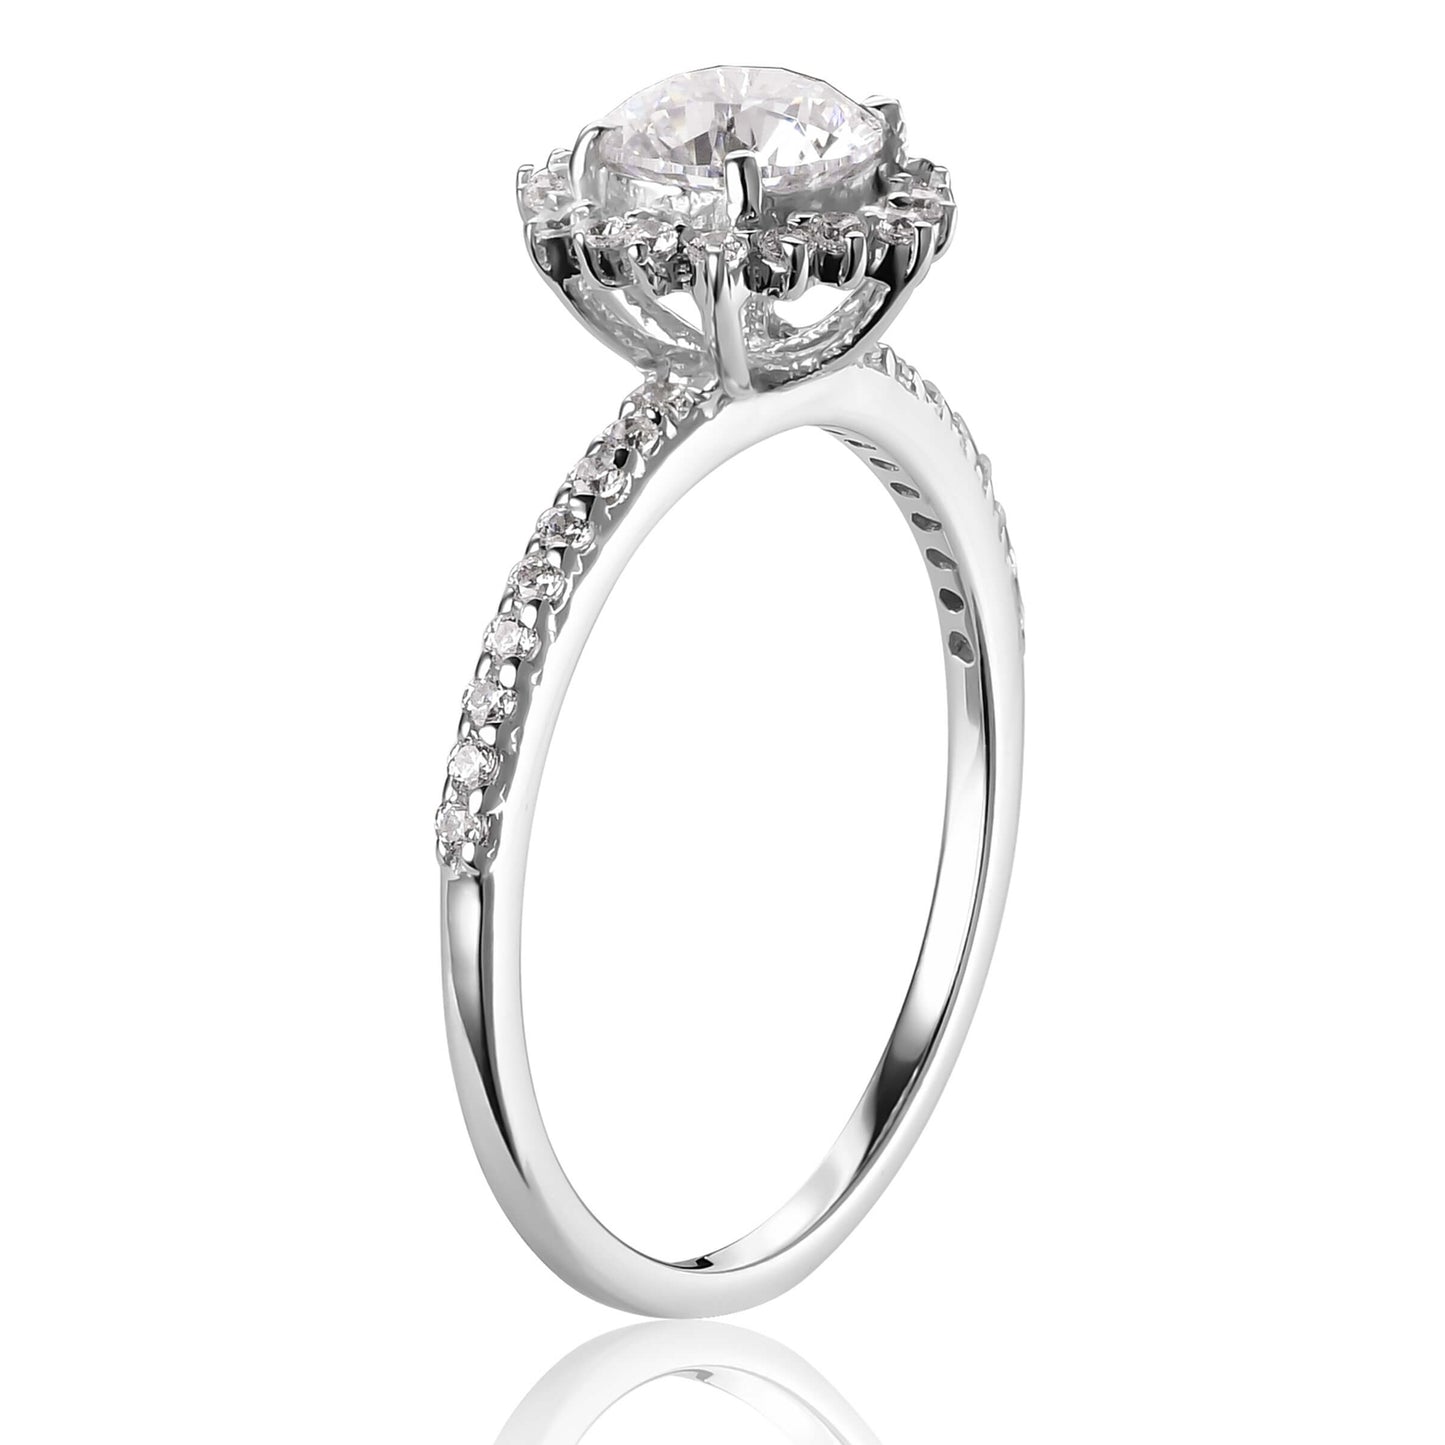 Silver Engagement Rings Pure Silver Diamond Craved Engagement Ring Image 1